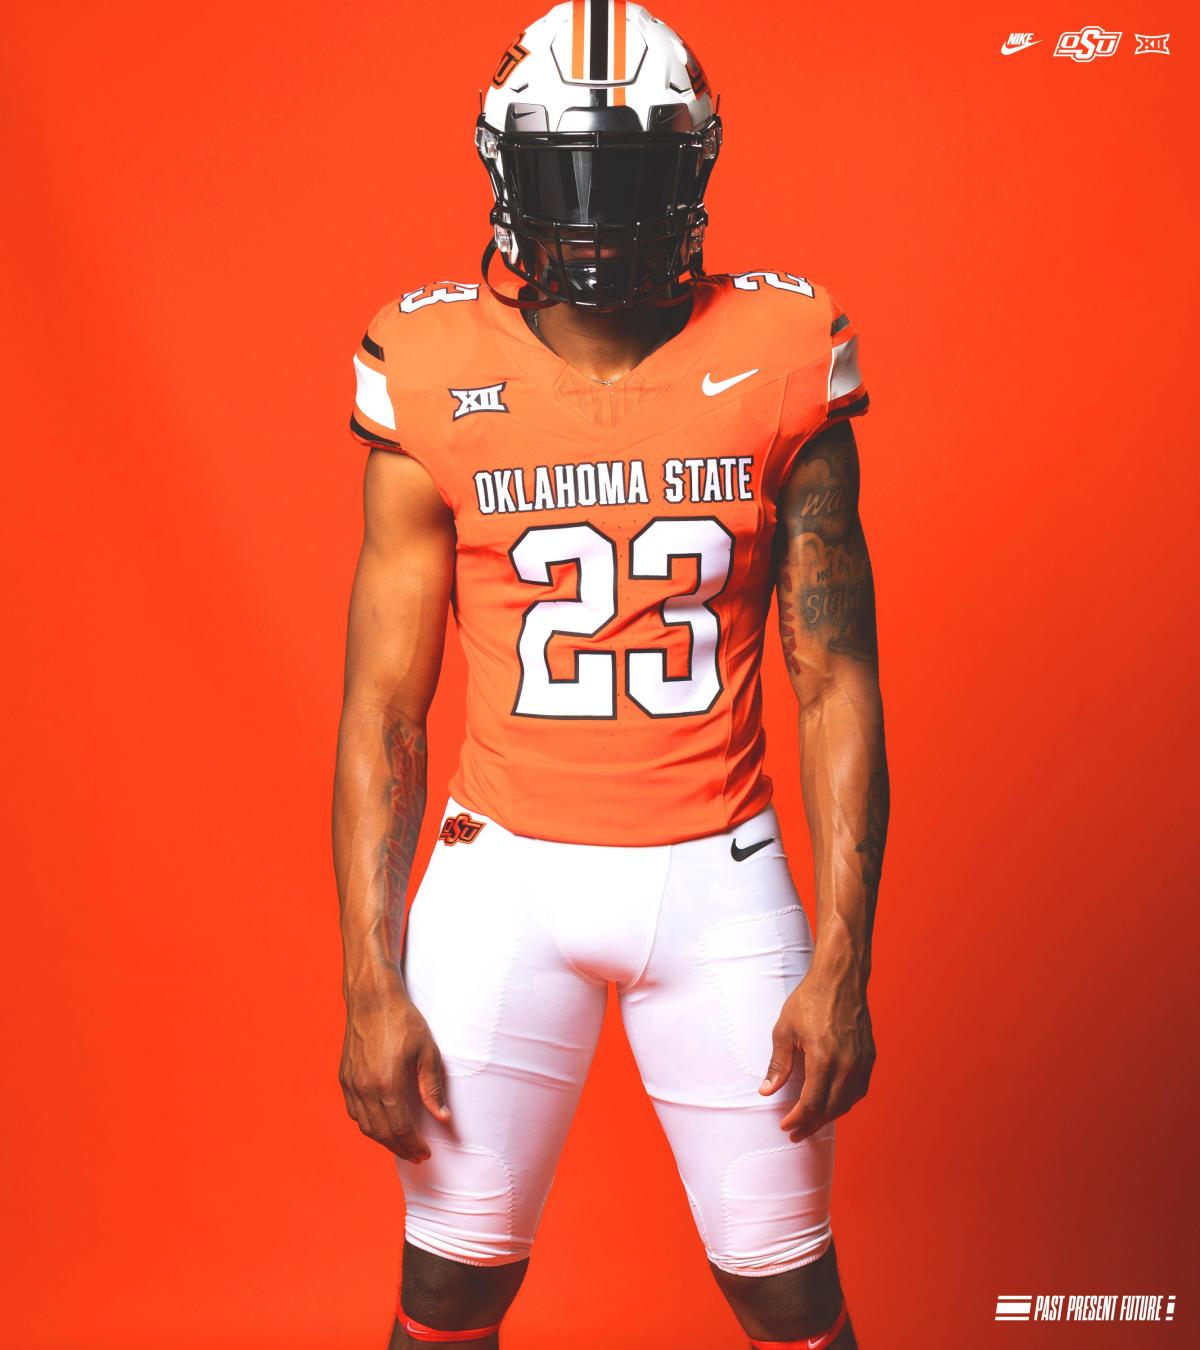 New Oklahoma State football uniforms feature a nod to Barry Sanders